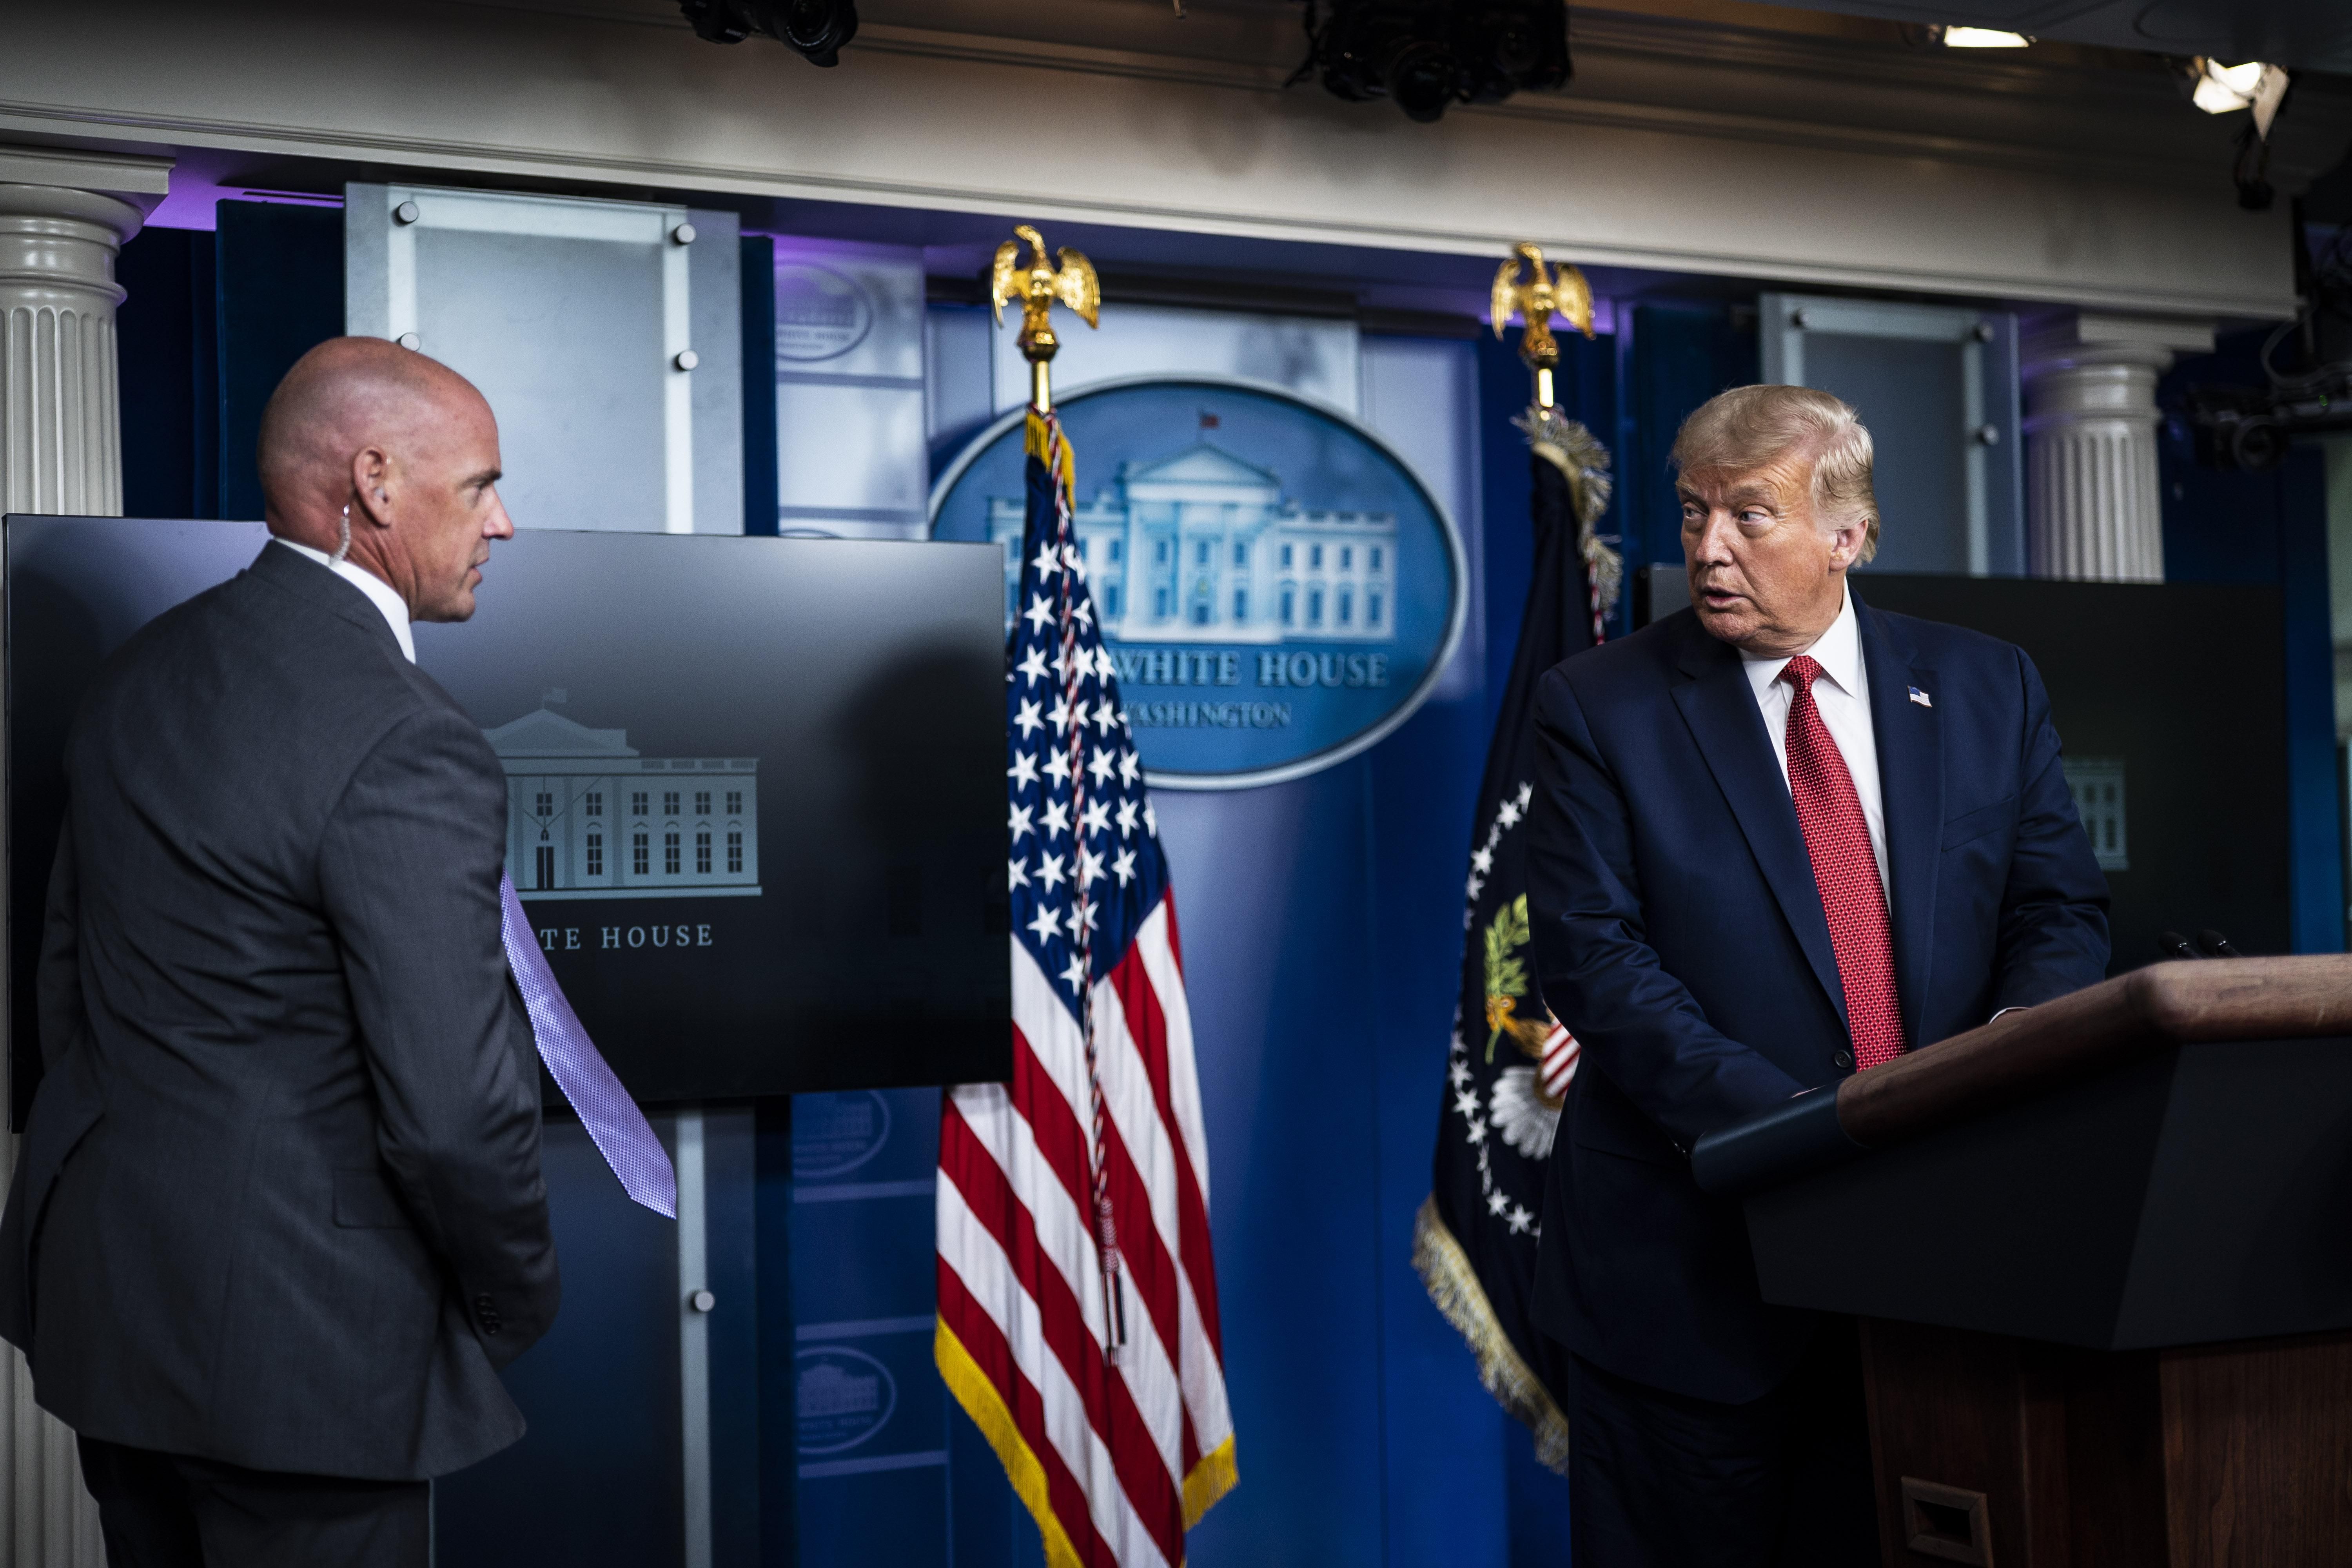 A member of the Secret Service speaks to then-President Donald Trump at the White House on August 10, 2020 in Washington, D.C. 